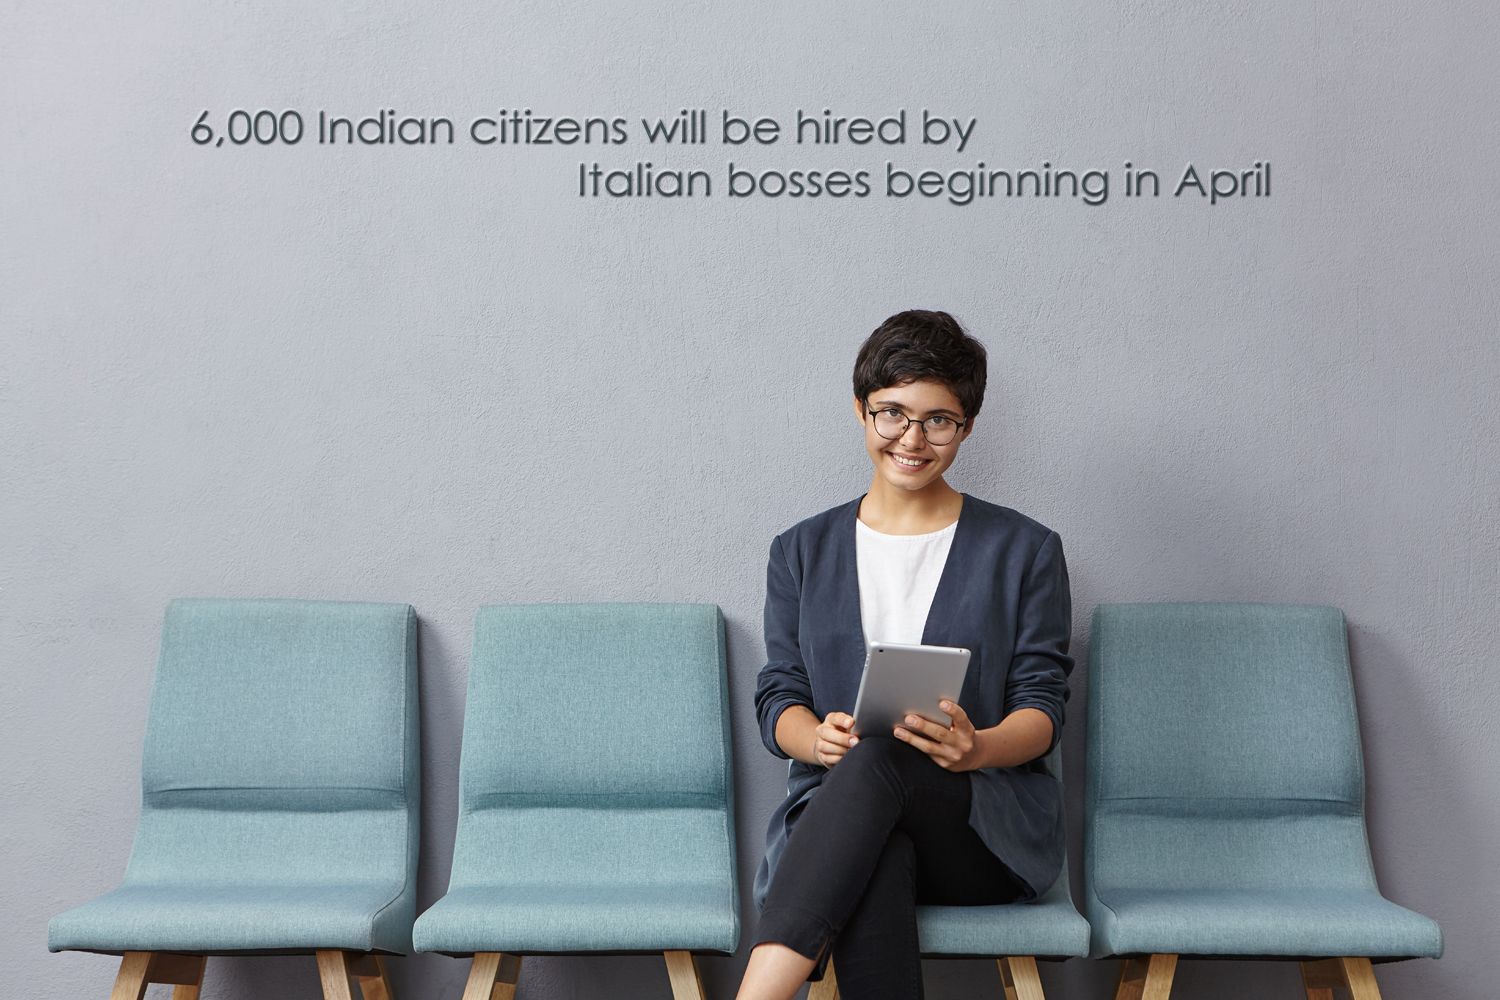 6,000 Indian citizens will be hired by Italian bosses beginning in April.